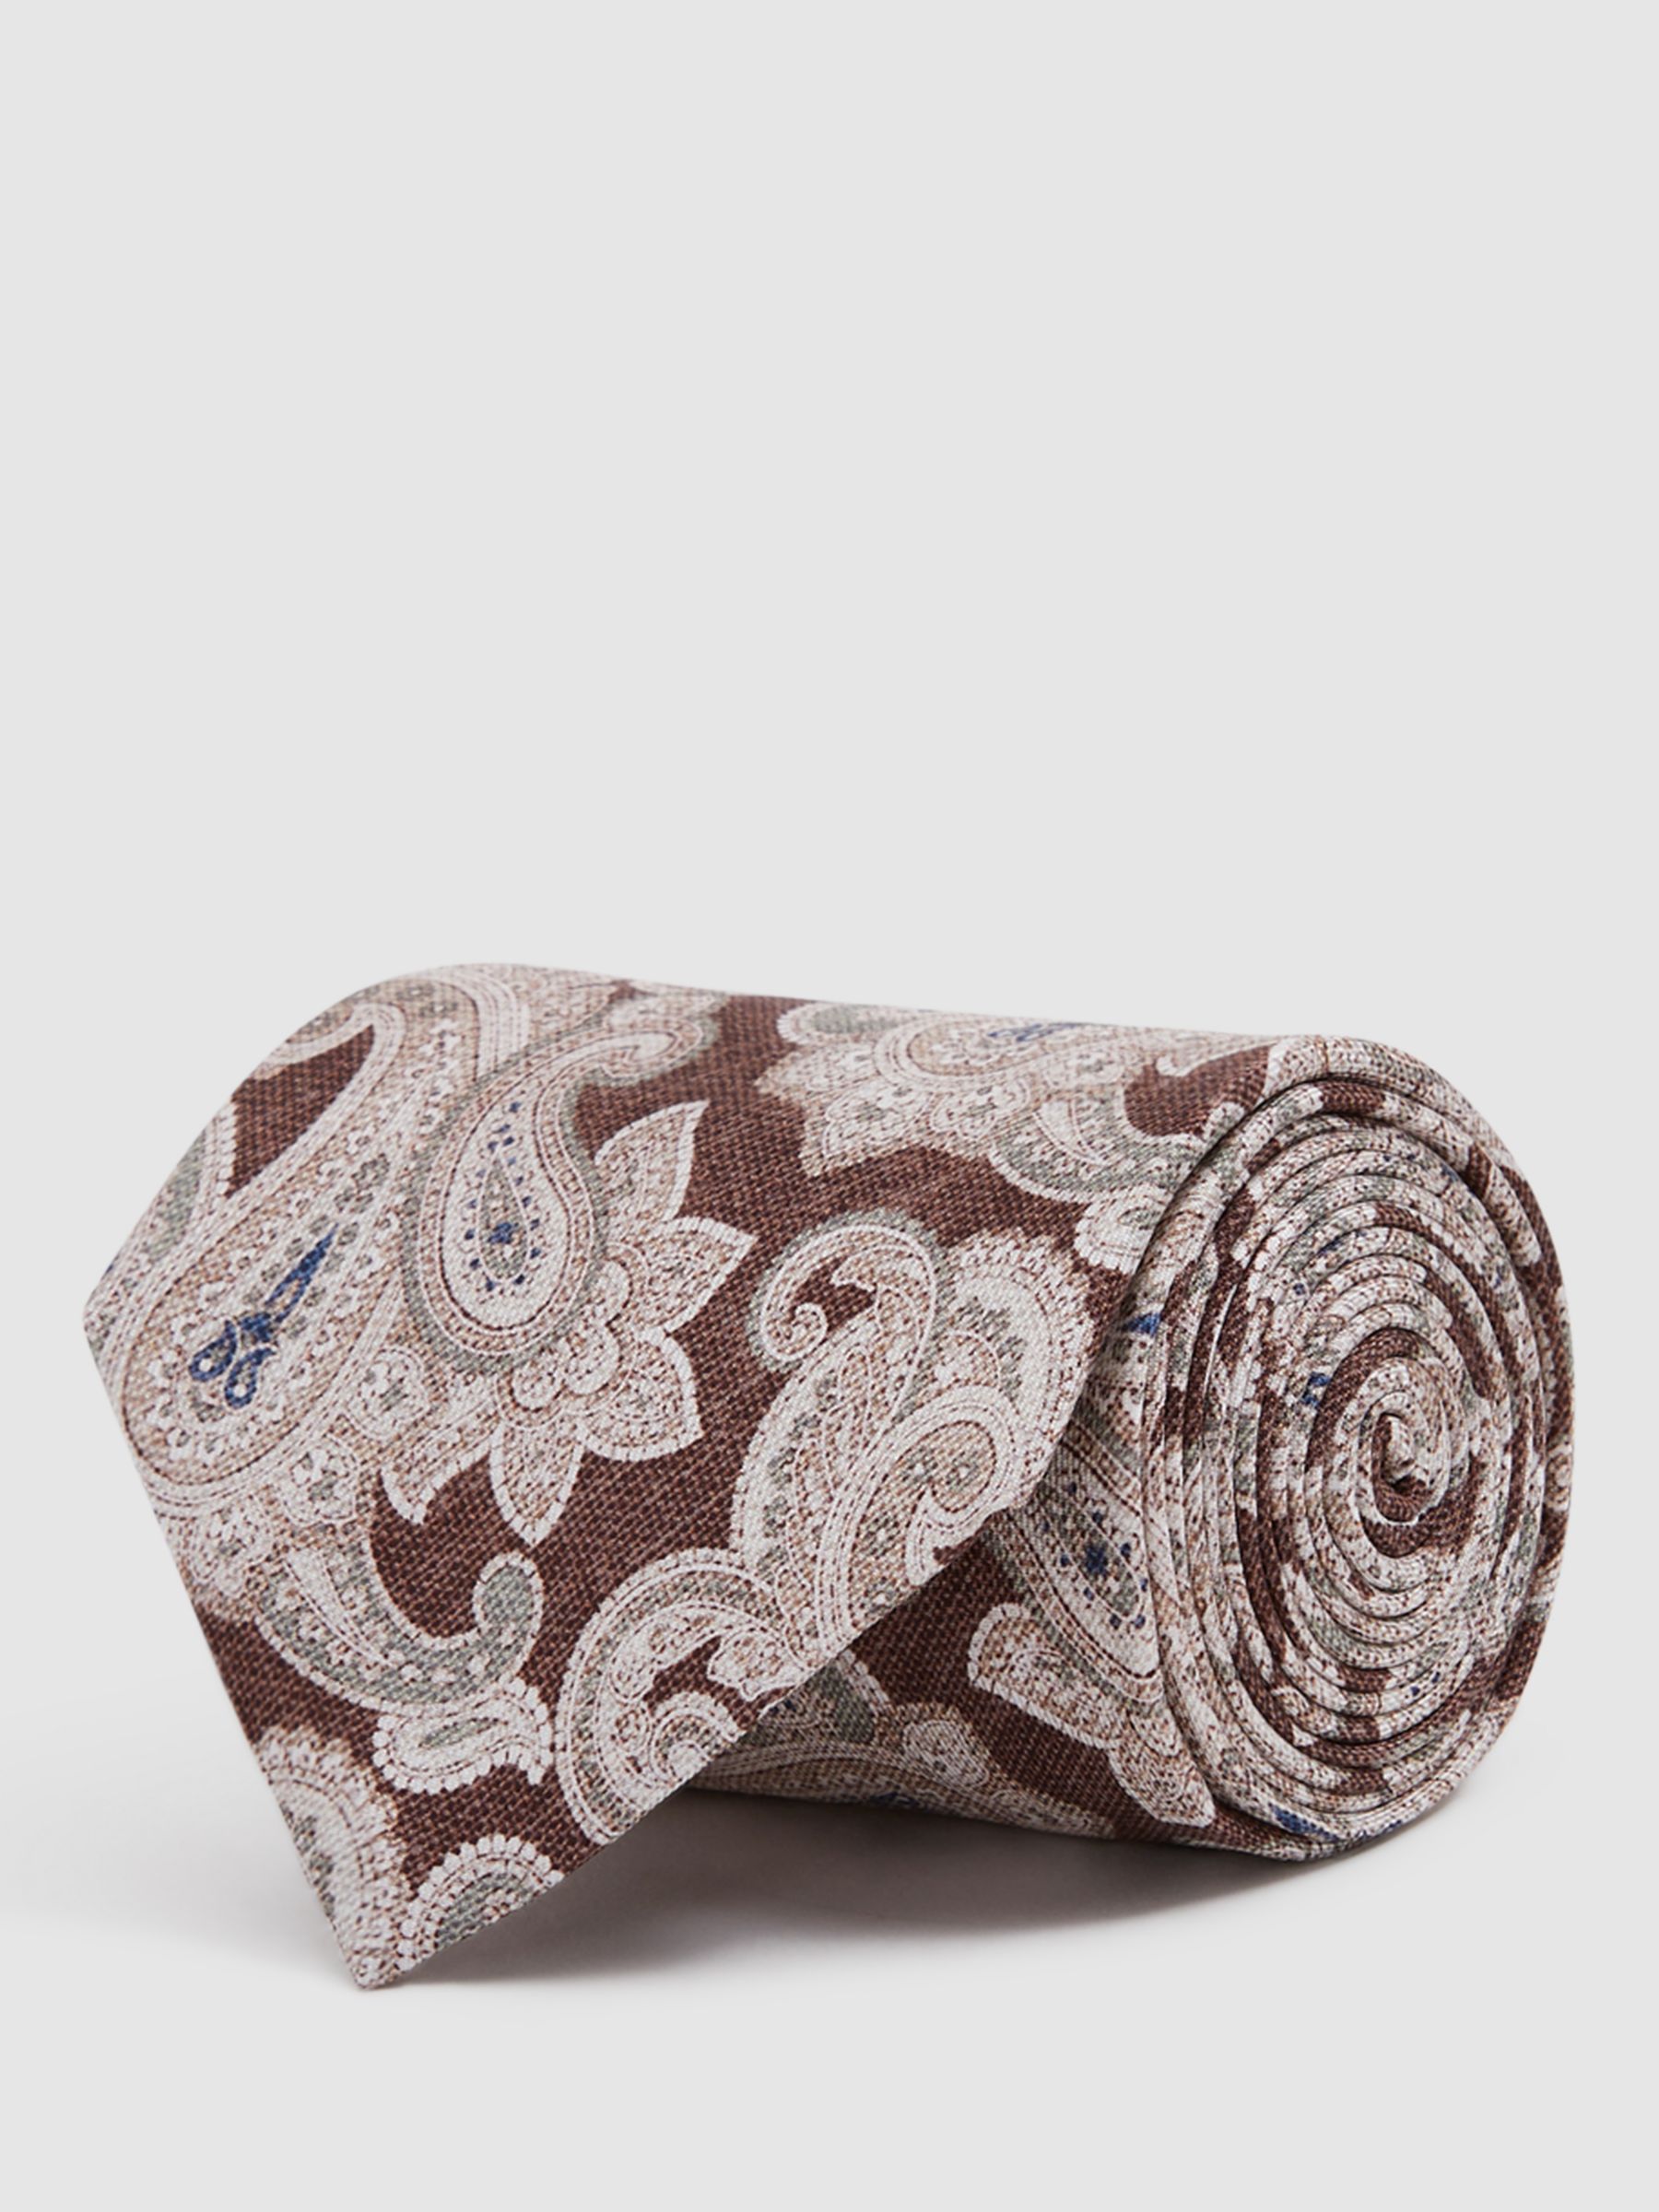 Reiss Giovanni Paisley Silk Tie, Tobacco/Oatmeal, One Size